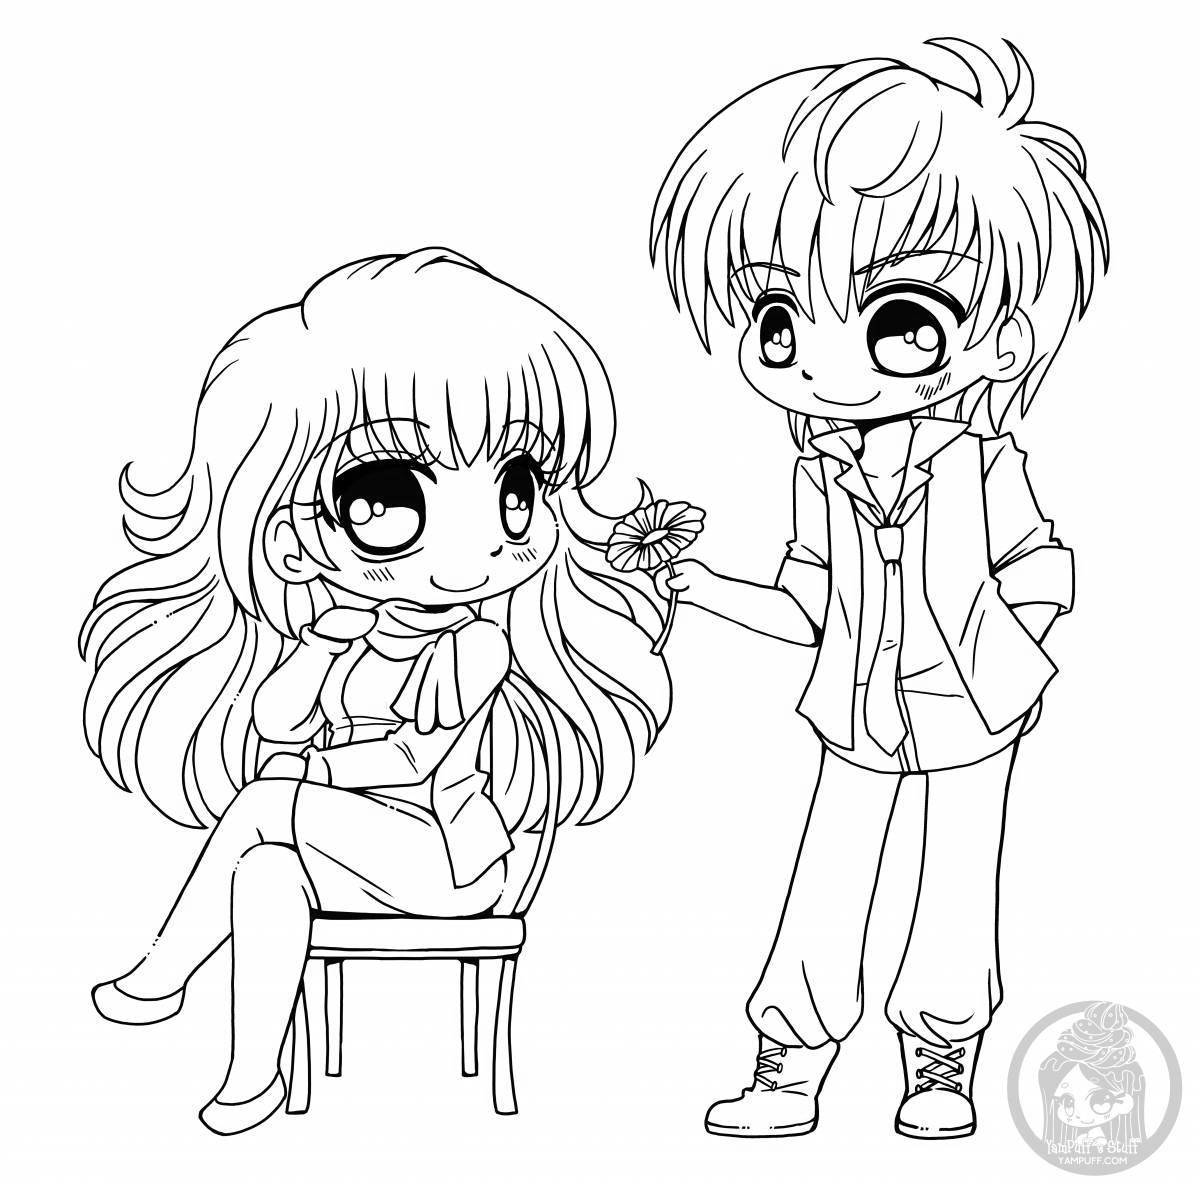 Elegant anime boy and girl coloring book